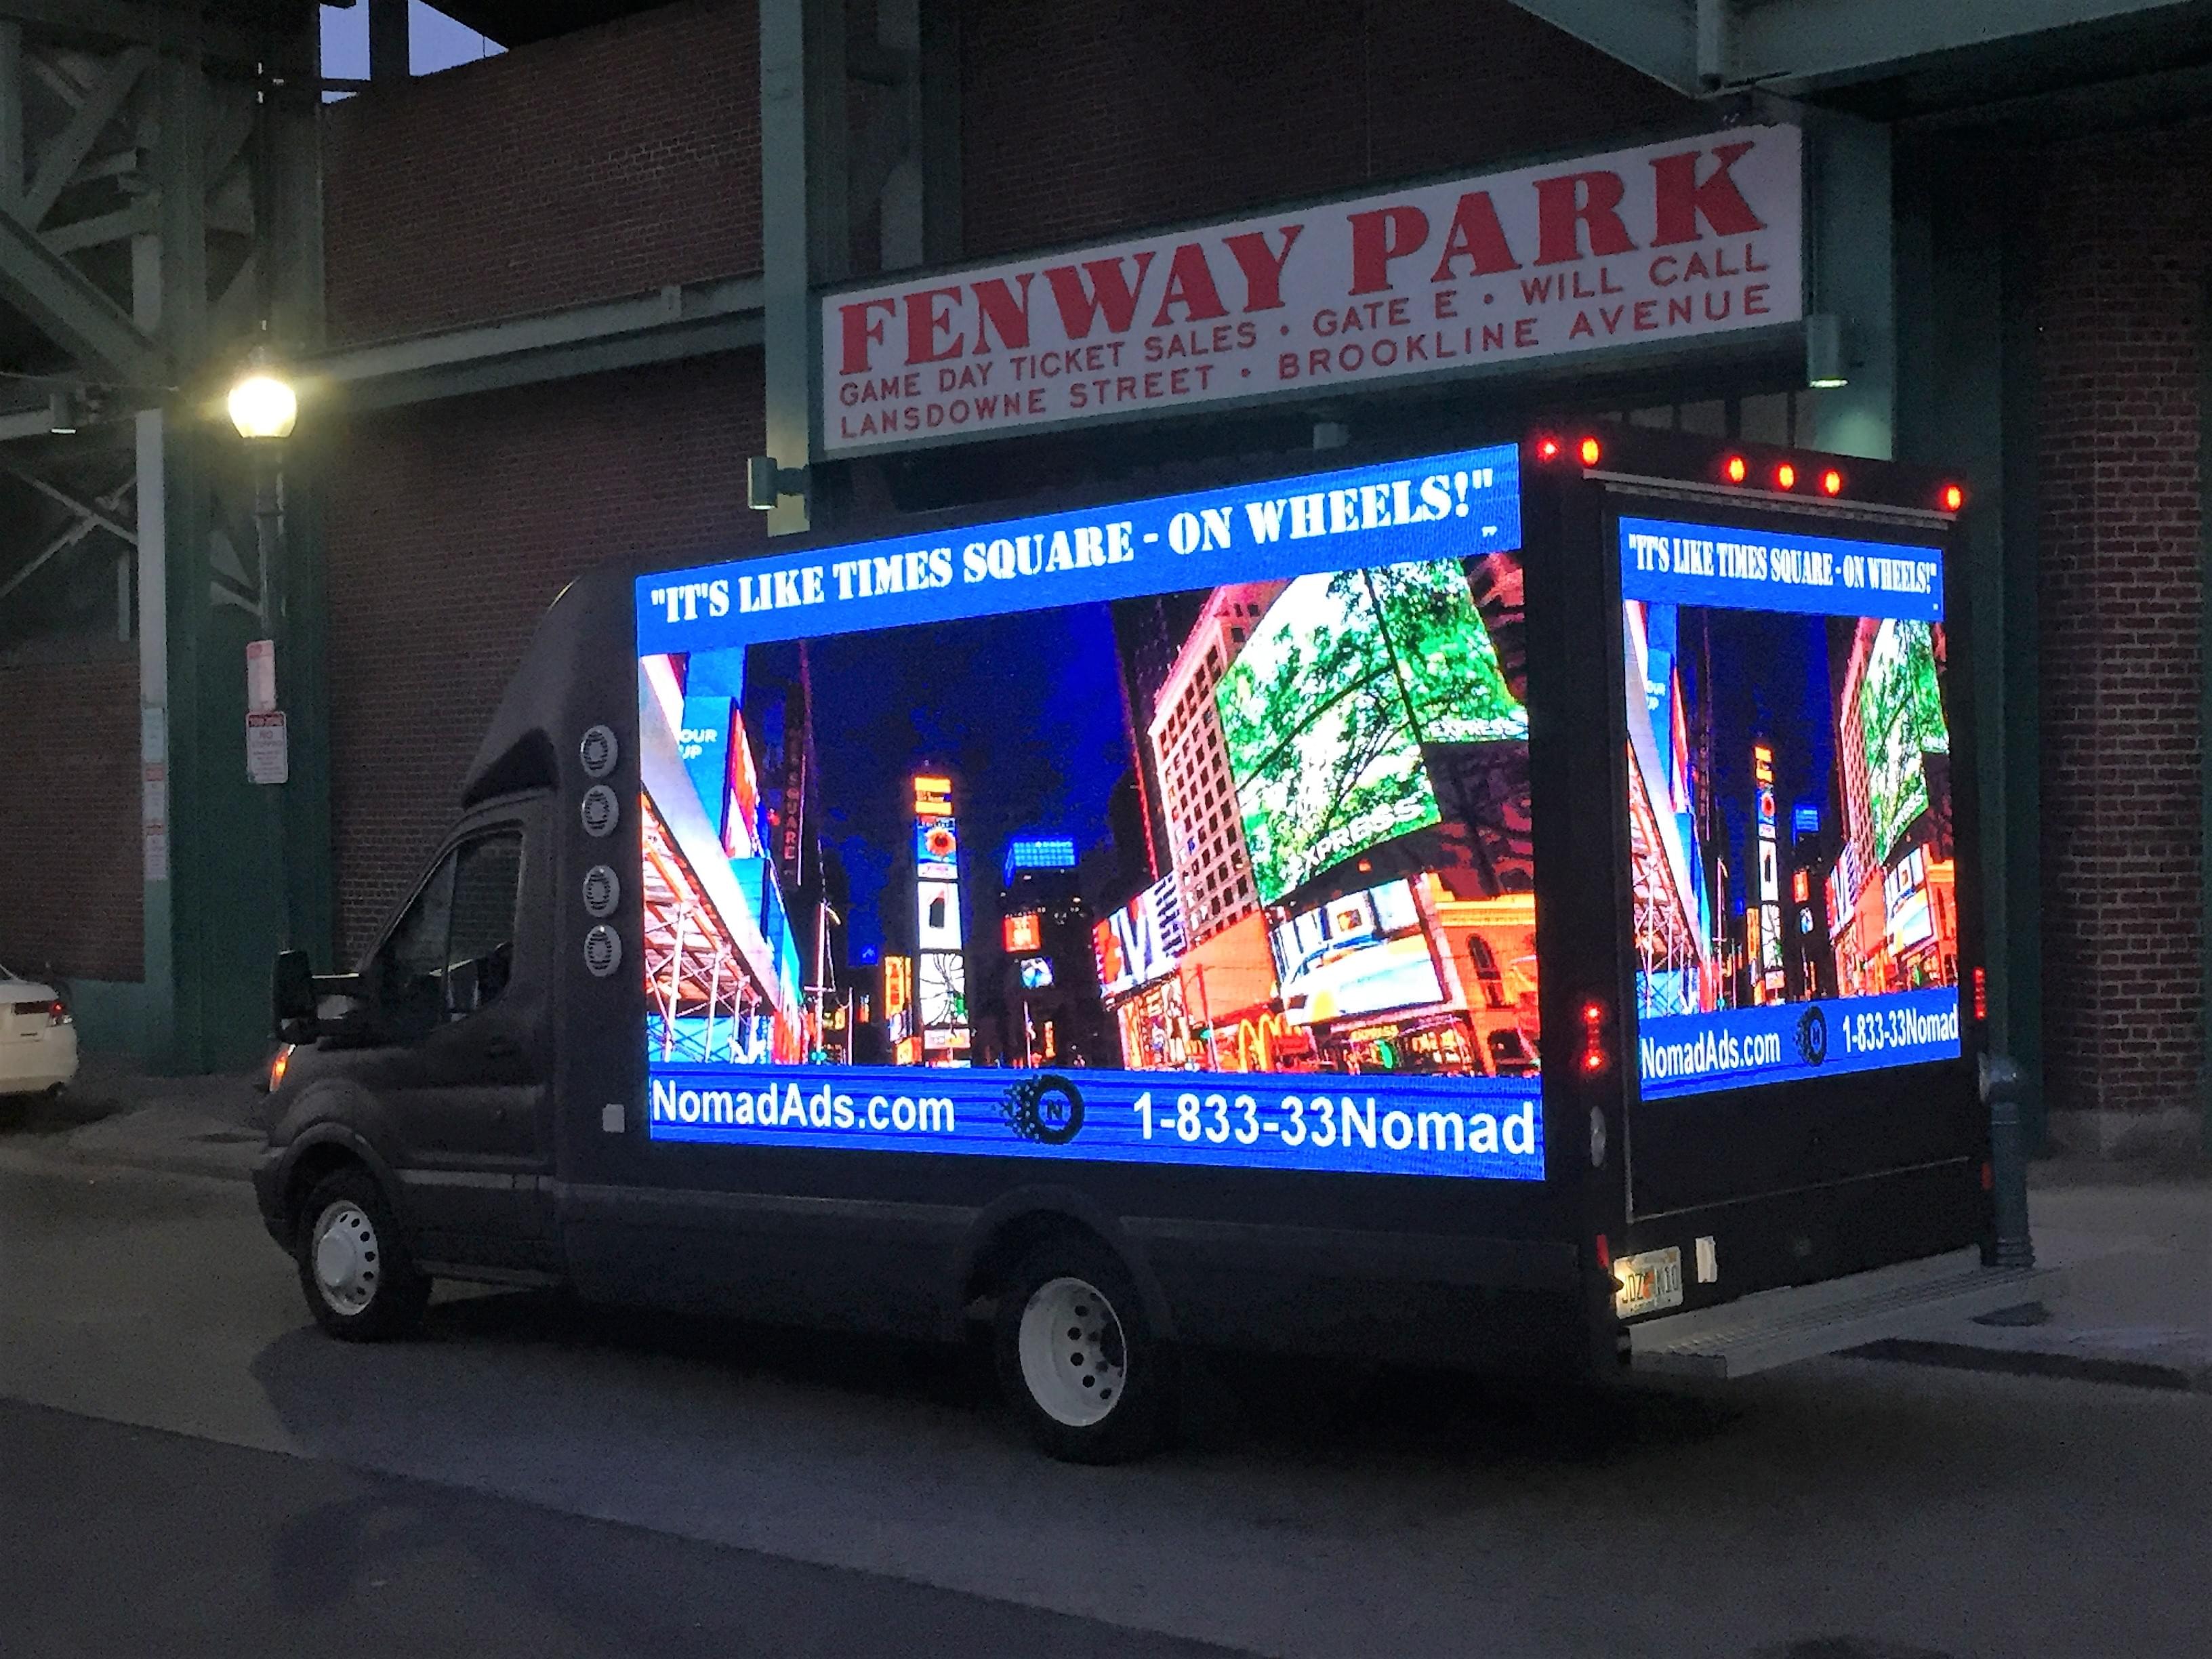 Bright visual effects lead consumers towards the mobile billboard without hassle